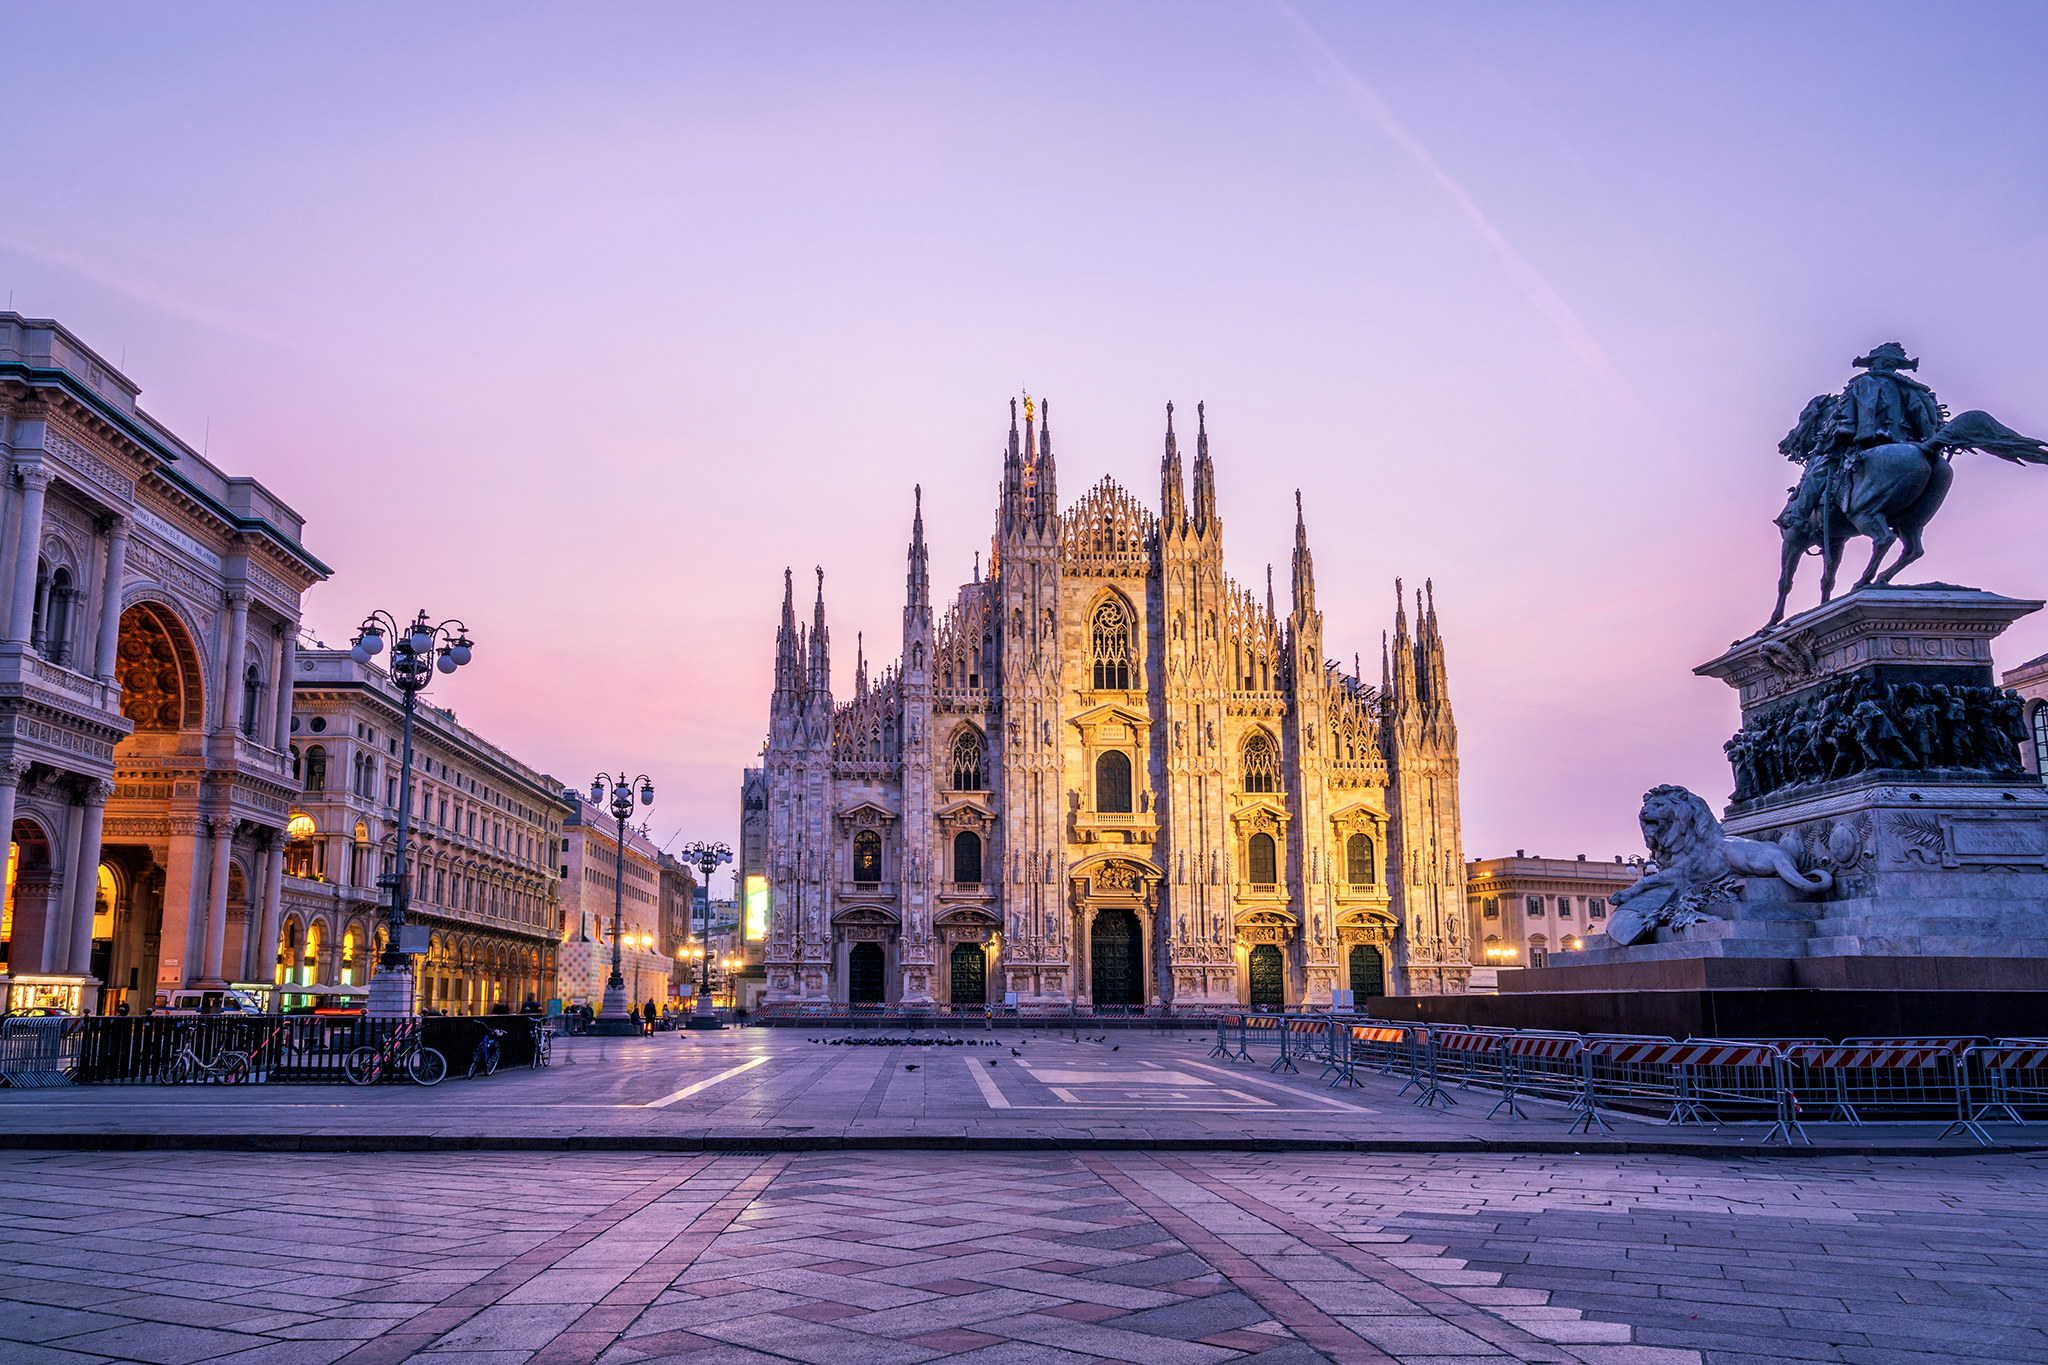 tourist attractions of milan